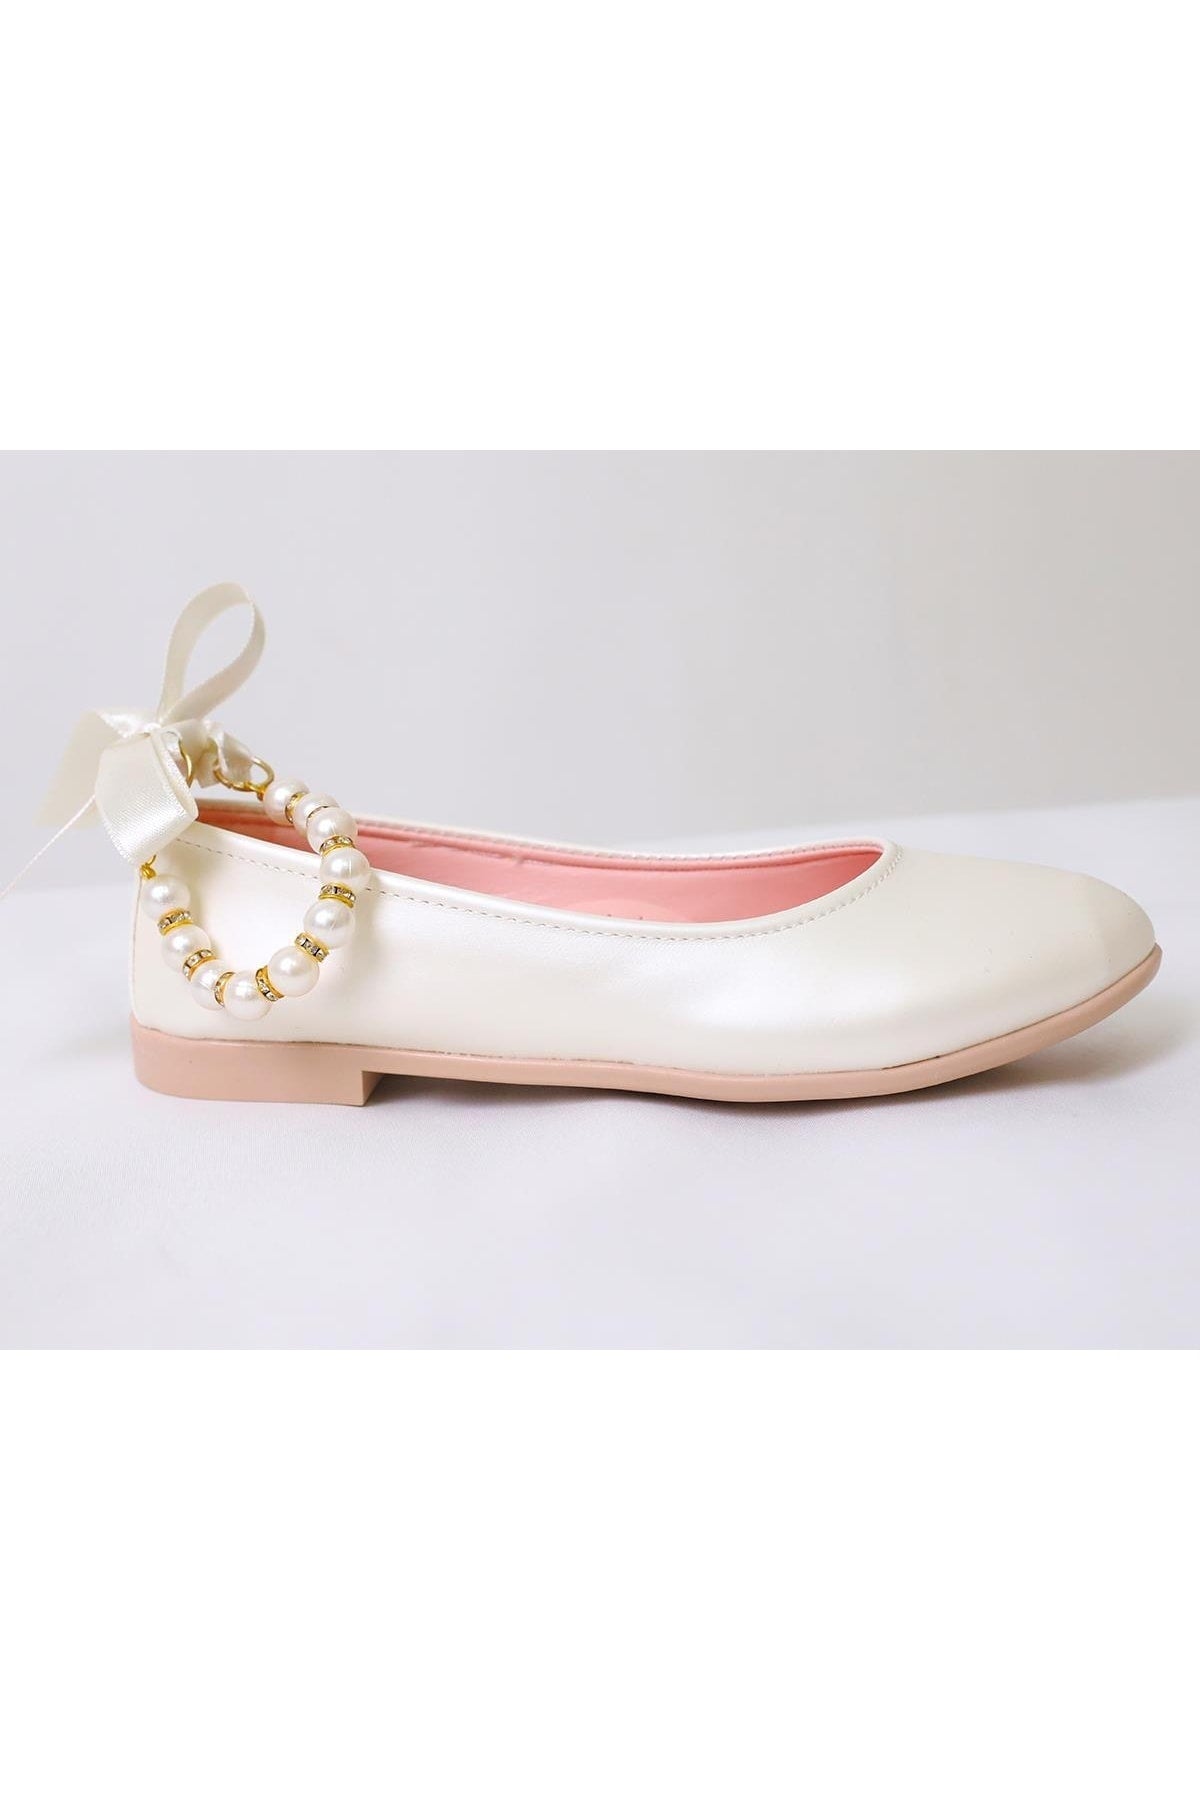 Pearl Ankle Girls Baby Flats